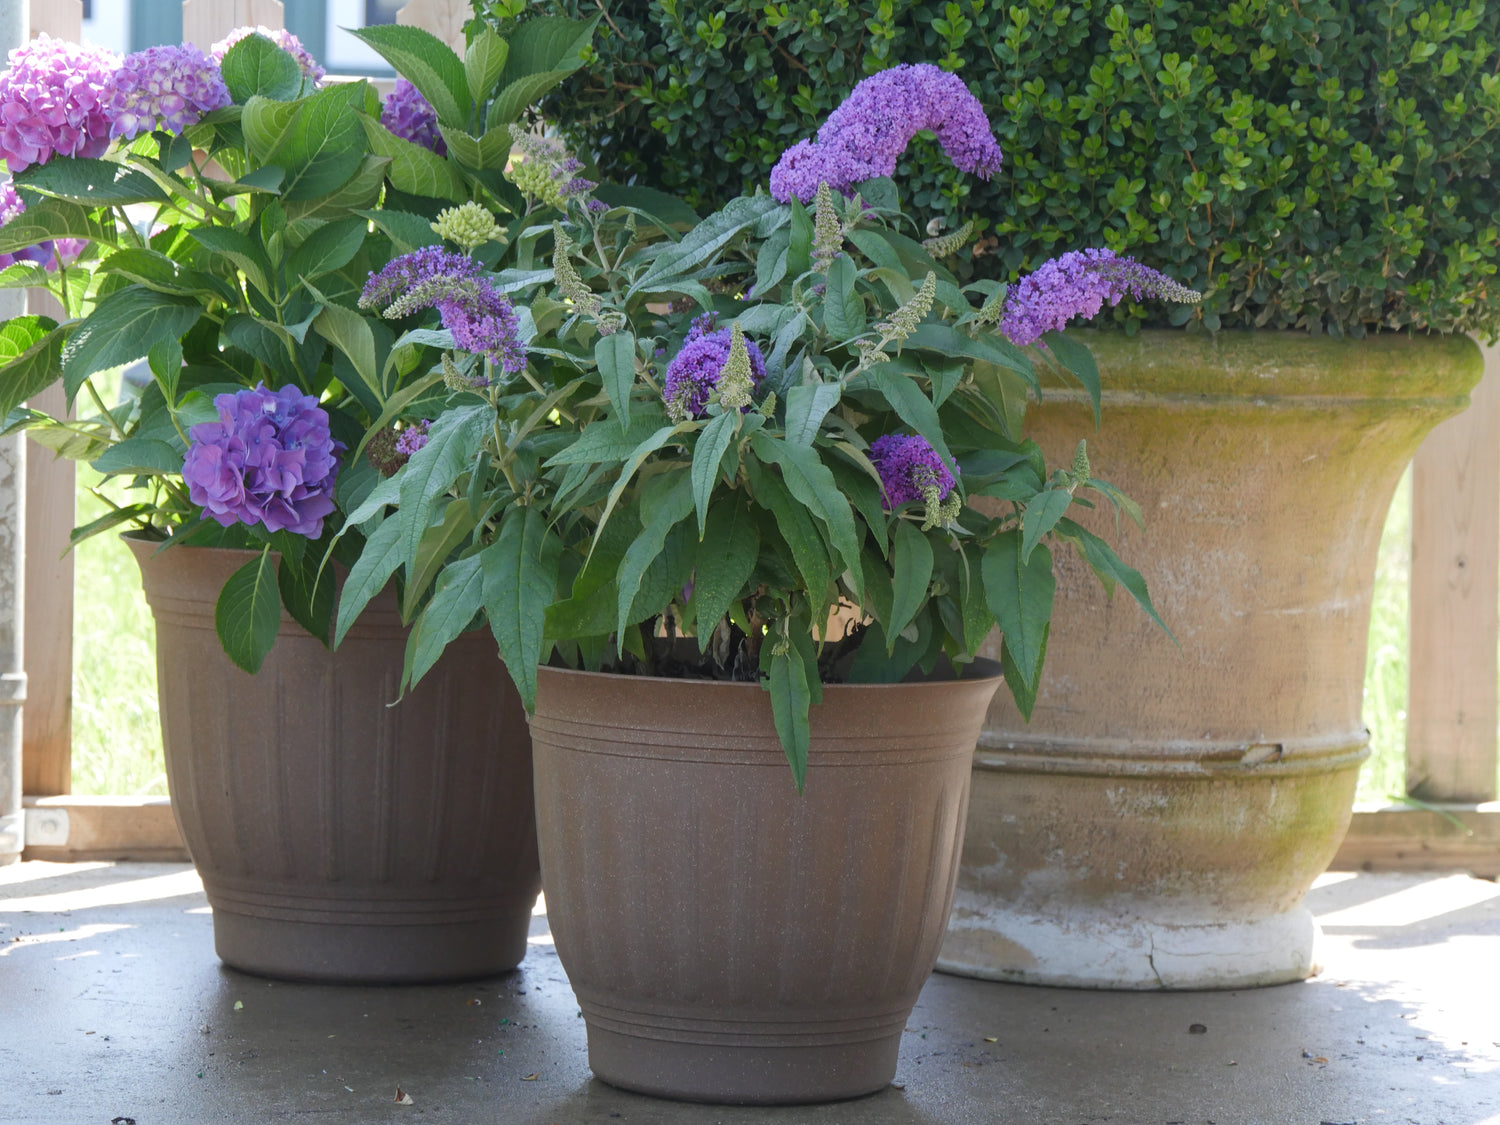 Pugster Amethyst butterfly bush being grown in a container on a patio